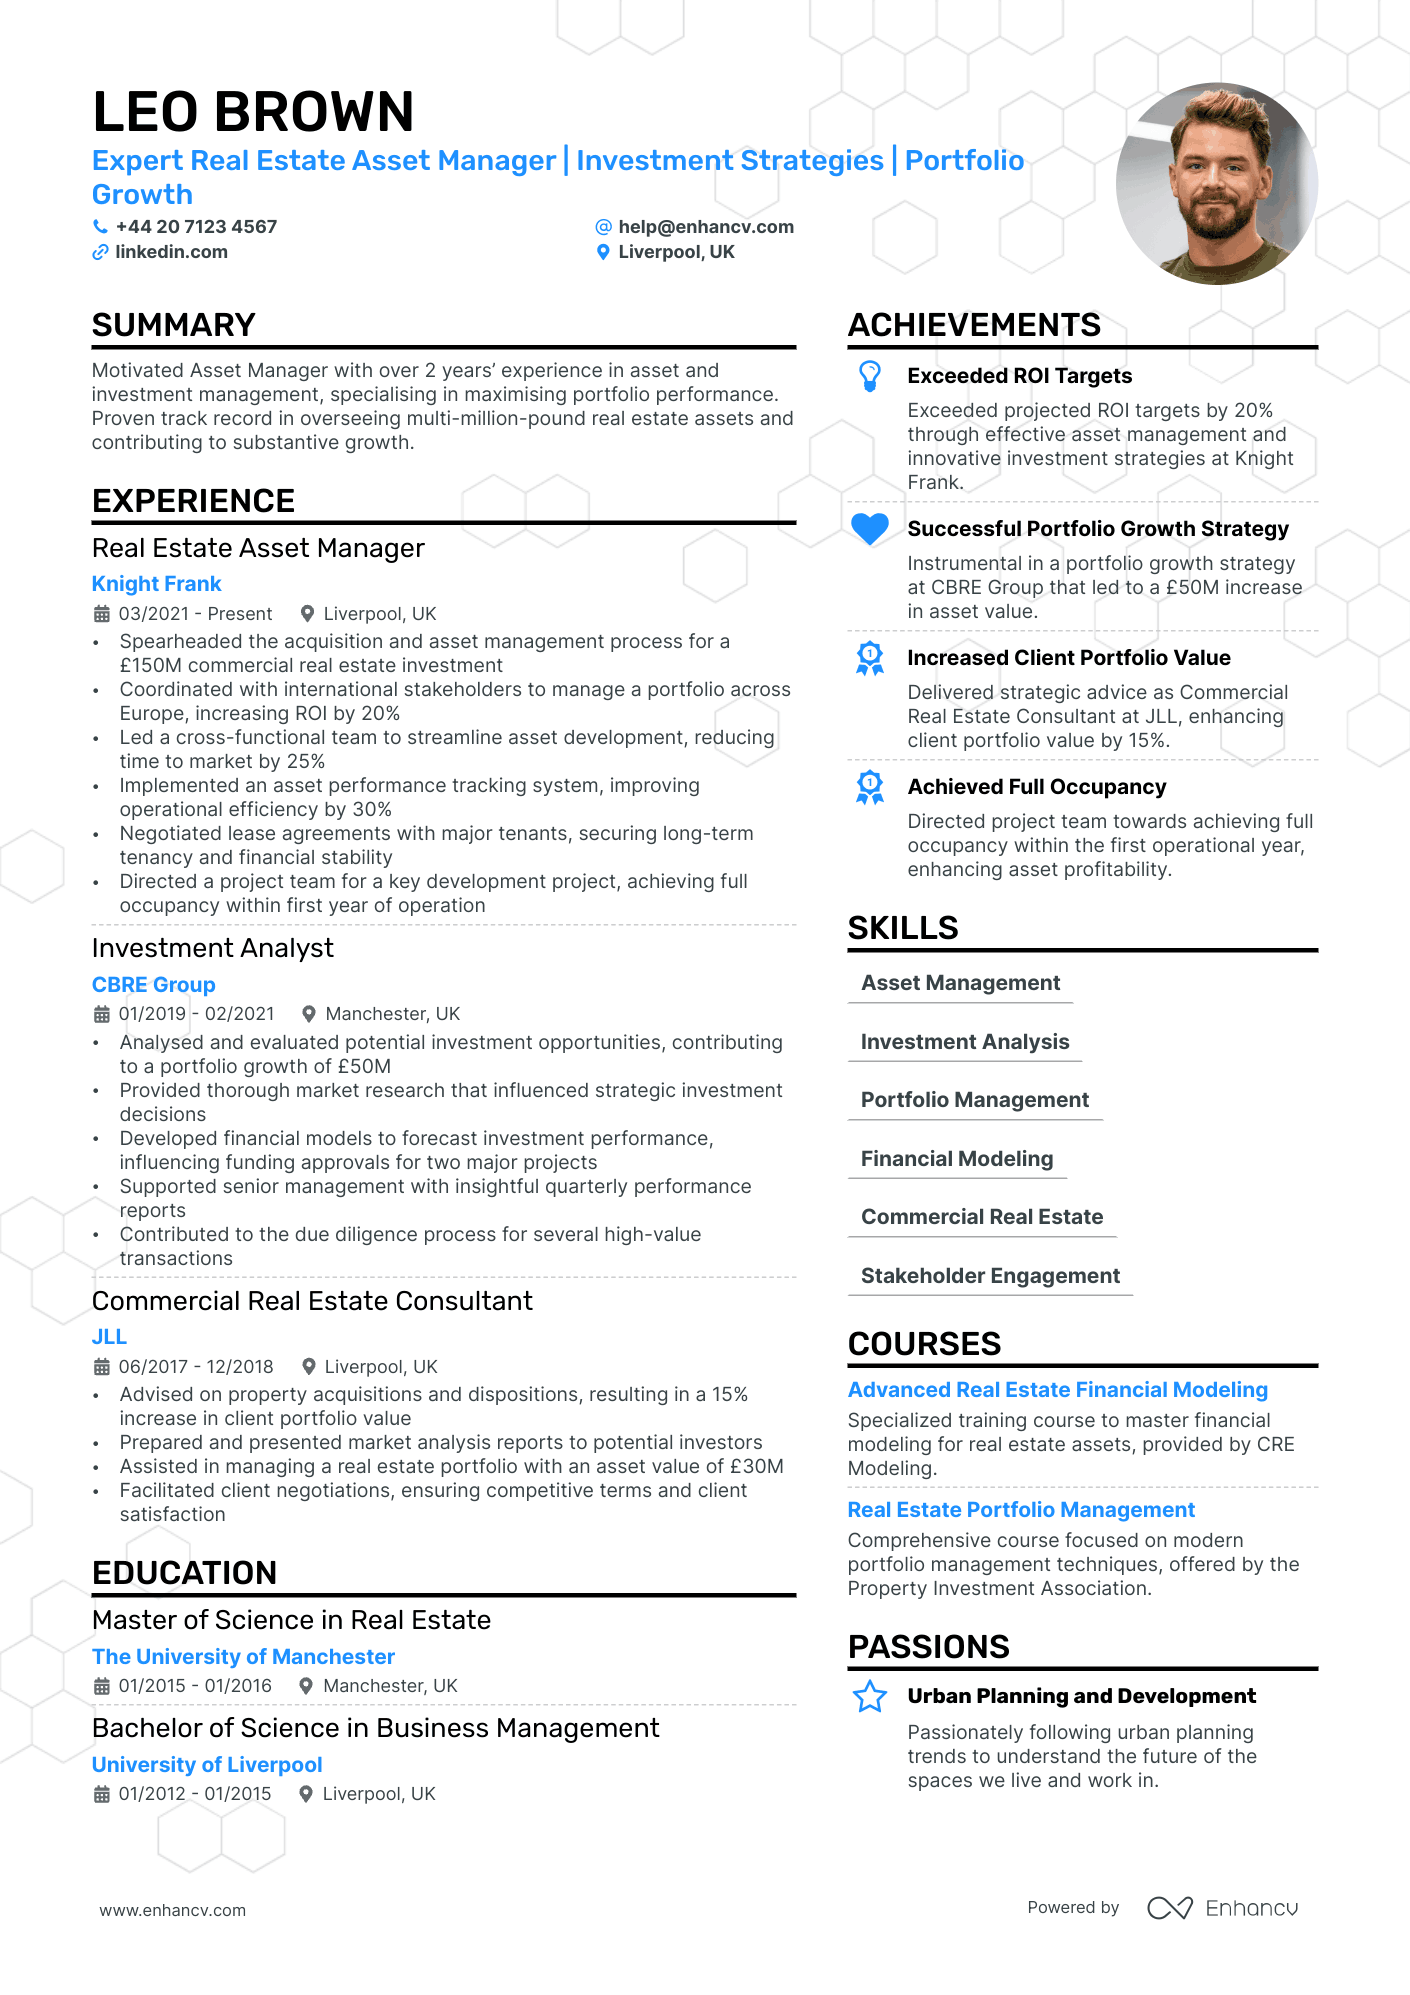 private equity resume example